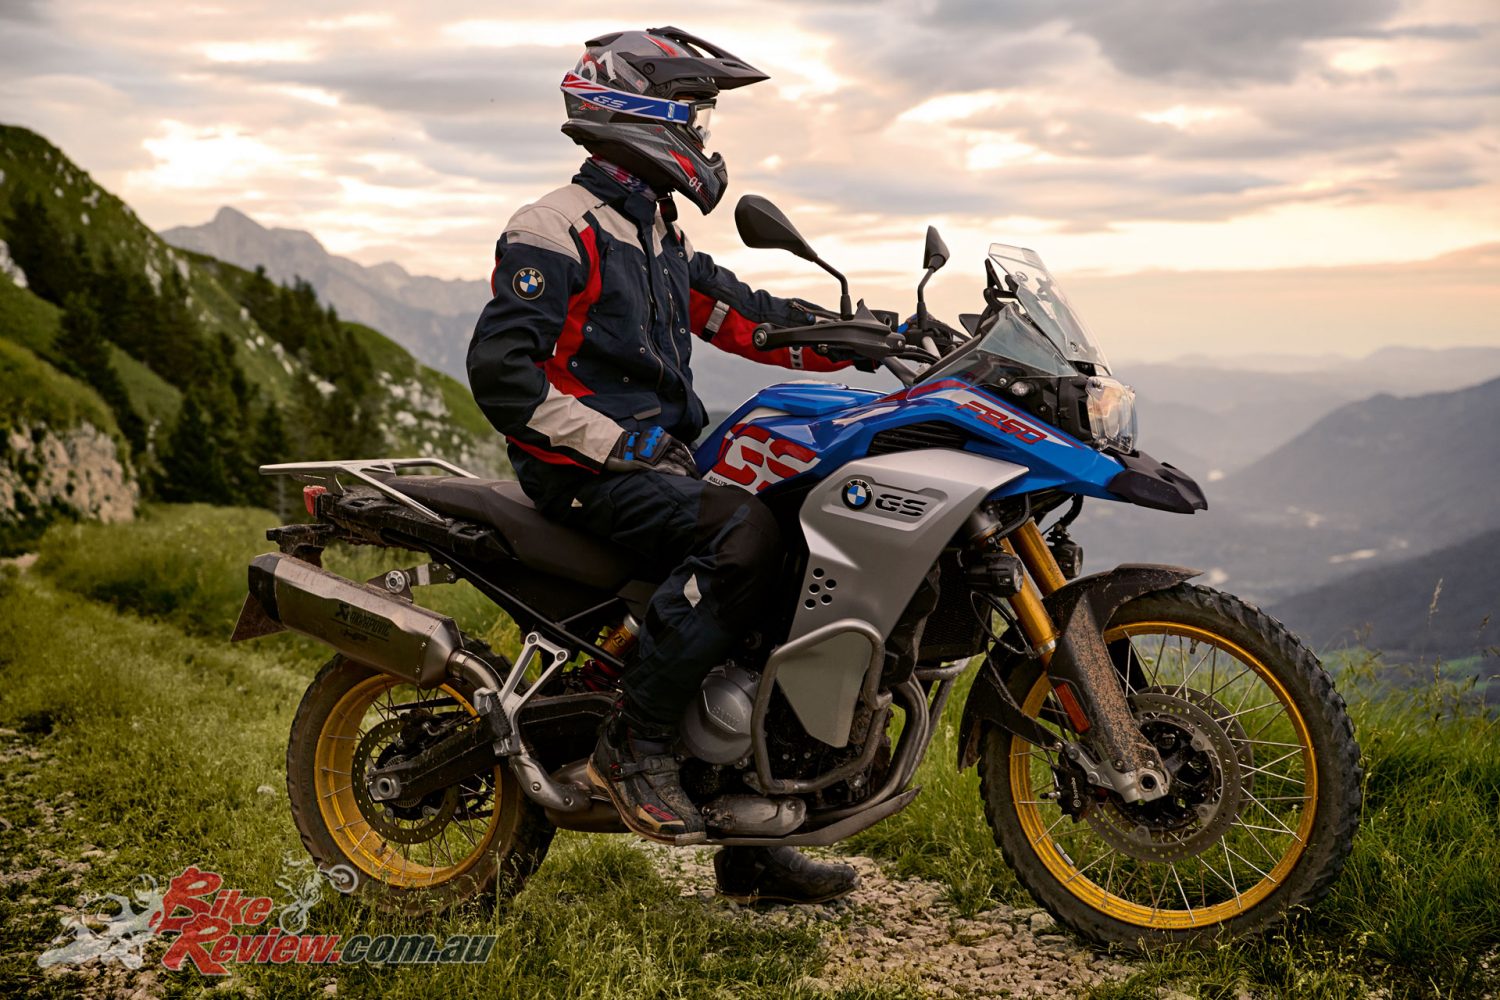 BMW announce the 2019 F 850 GS 'Adventure' edition